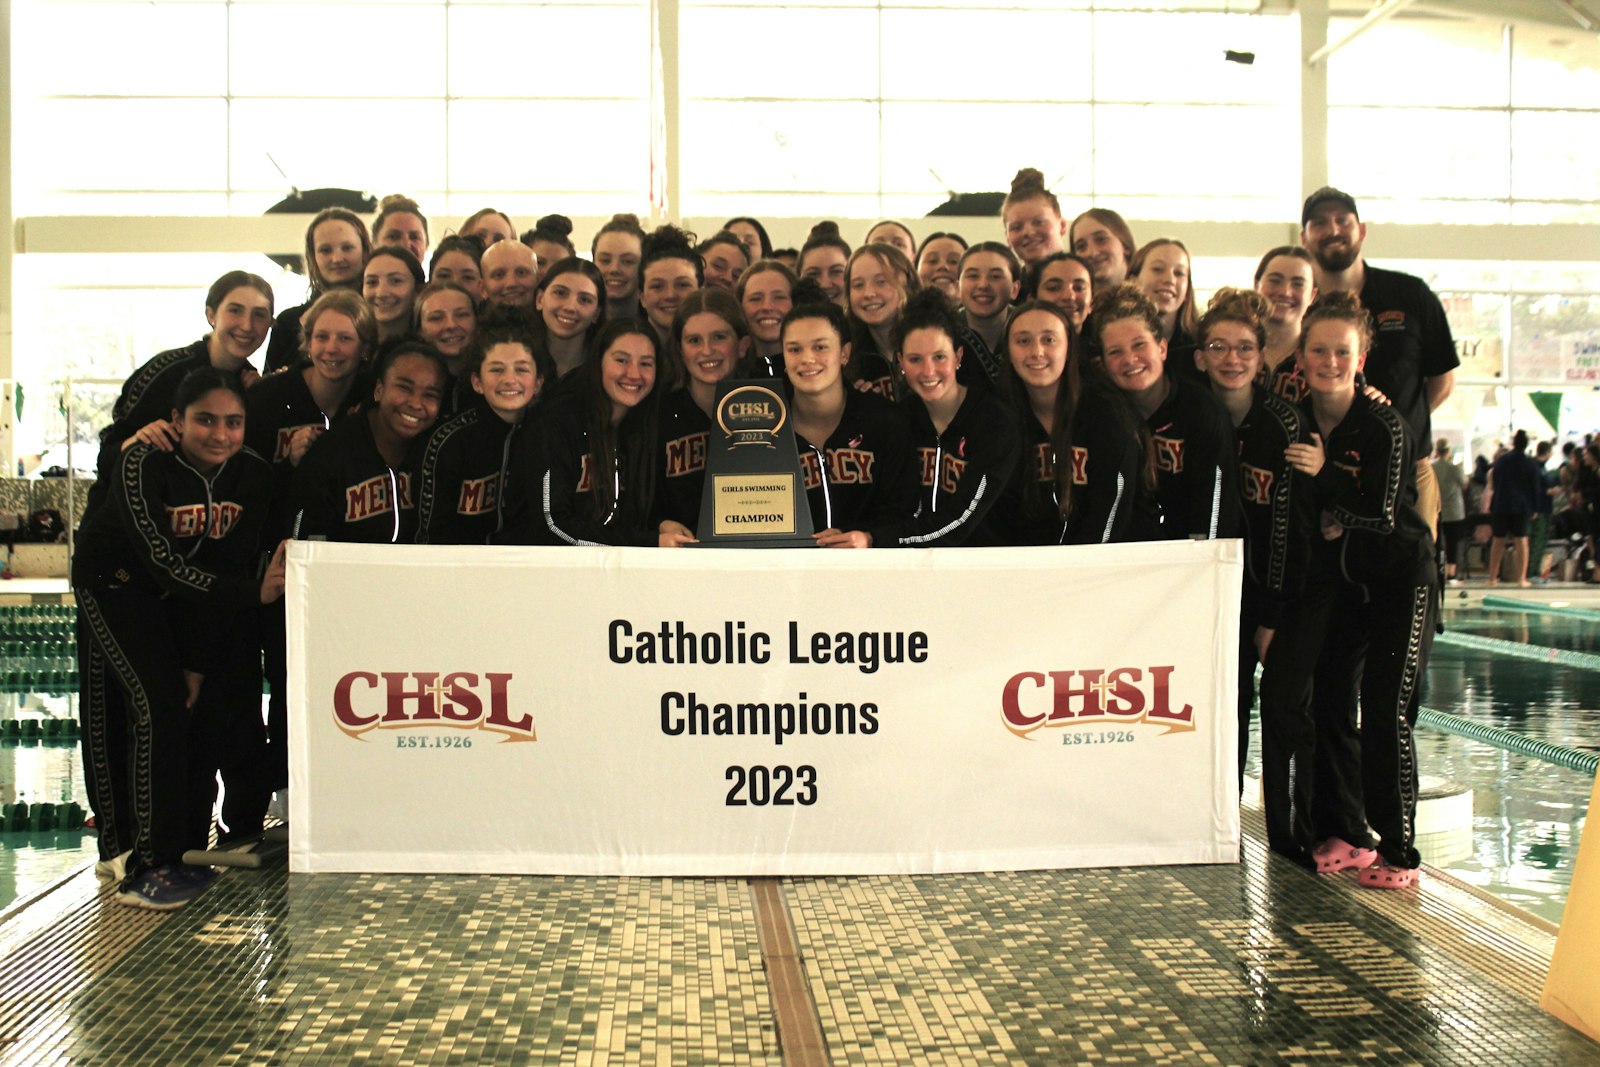 This is a familiar sight at the Catholic League swimming and diving championship meet: Farmington Hills Mercy posing with the first-place trophy.